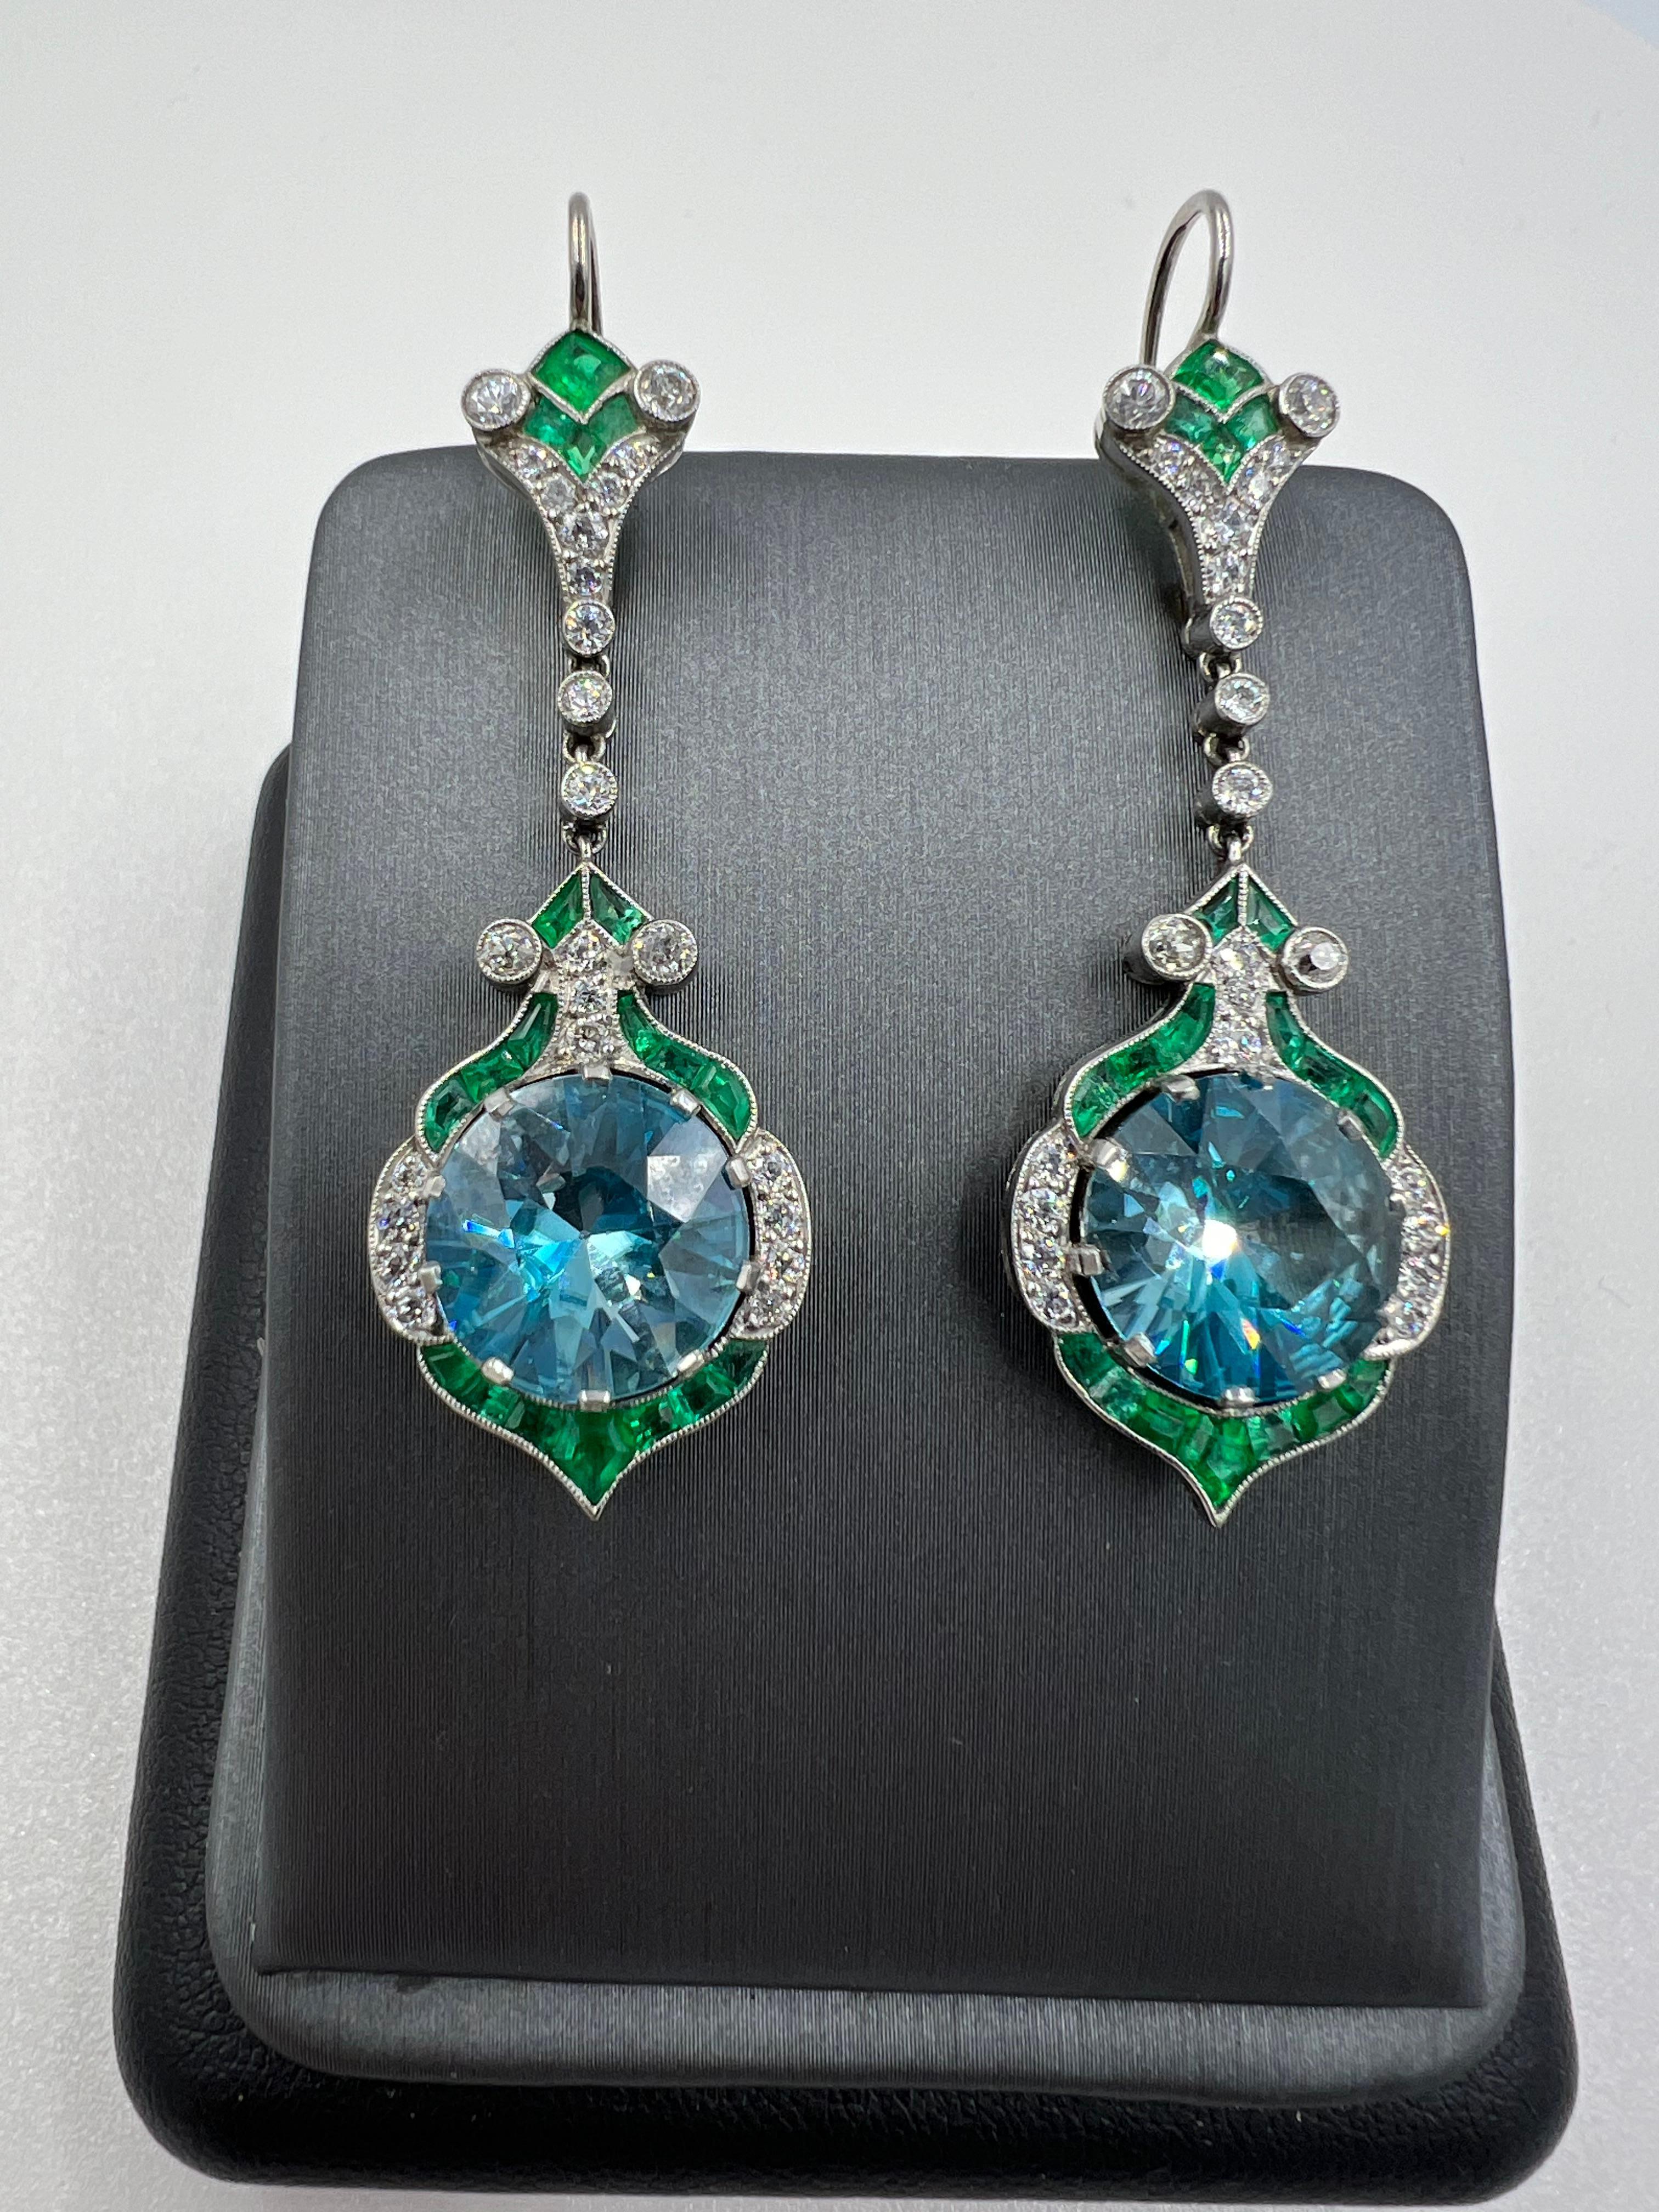 Blue Zircon Emerald Diamond platinum dangling earrings.

   Elegance and sophistication are epitomized in the exquisite Blue Zircon Emerald Diamond Platinum Dangling Earrings. Crafted with precision and attention to detail, these stunning earrings